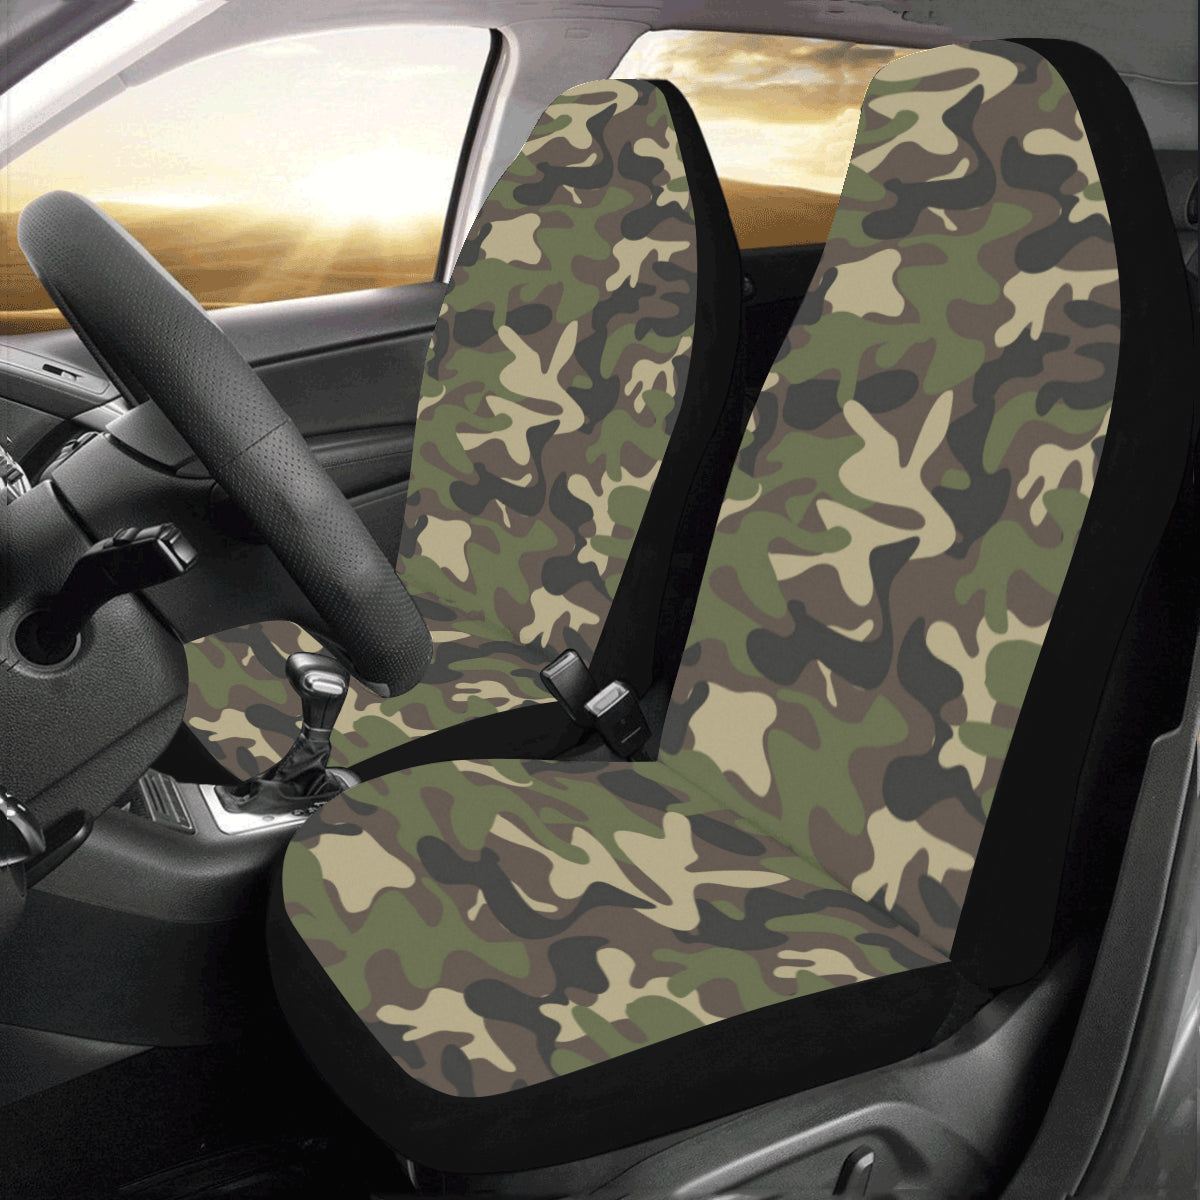 Green Camo Car Seat Cover, Army Brown Camouflage Front Seat Covers (Set of 2), Dog Seat Protectors Accessory SUV Truck Starcove Fashion